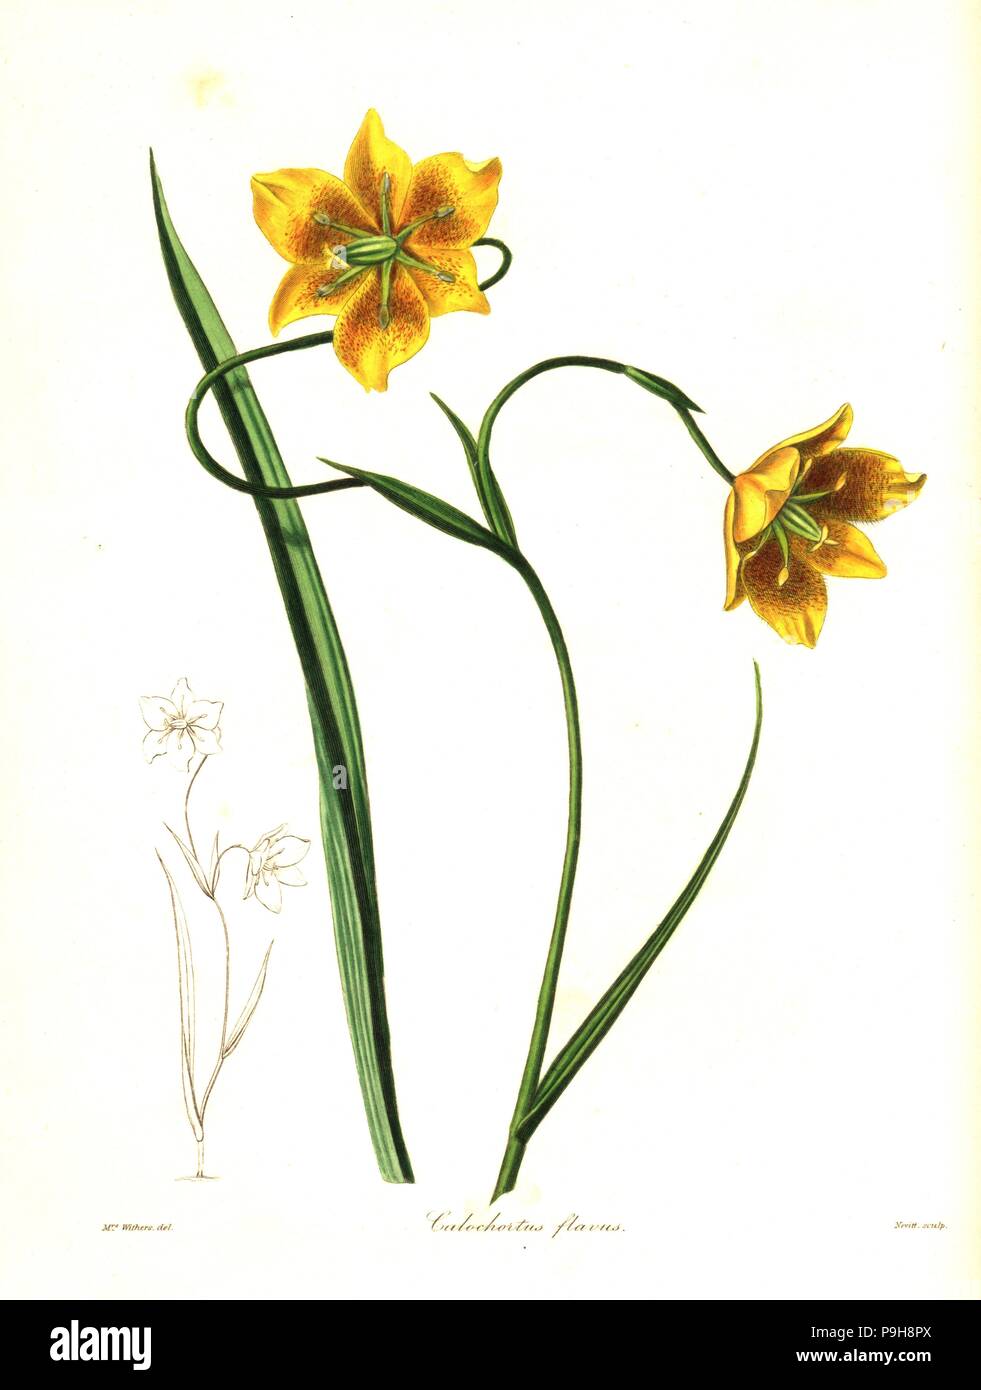 Calochortus barbatus lily (Yellow calochortus, Calochortus flavus). Handcoloured copperplate engraving by S. Nevitt after a botanical illustration by Mrs Augusta Withers from Benjamin Maund and the Rev. John Stevens Henslow's The Botanist, London, 1836. Stock Photo